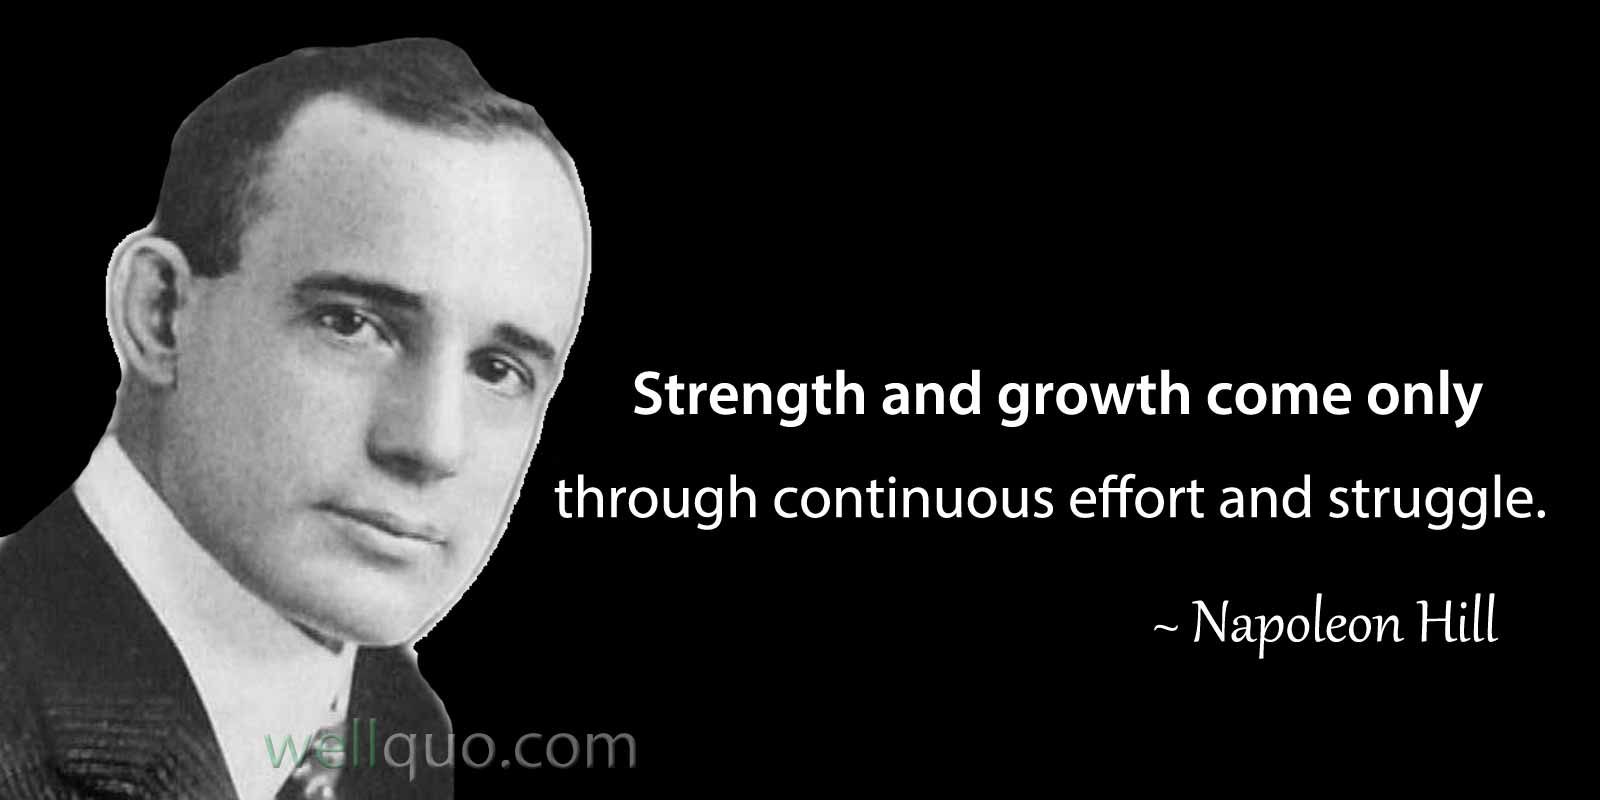 Napoleon Hill Quotes Makes your Desire to Success - Well Quo